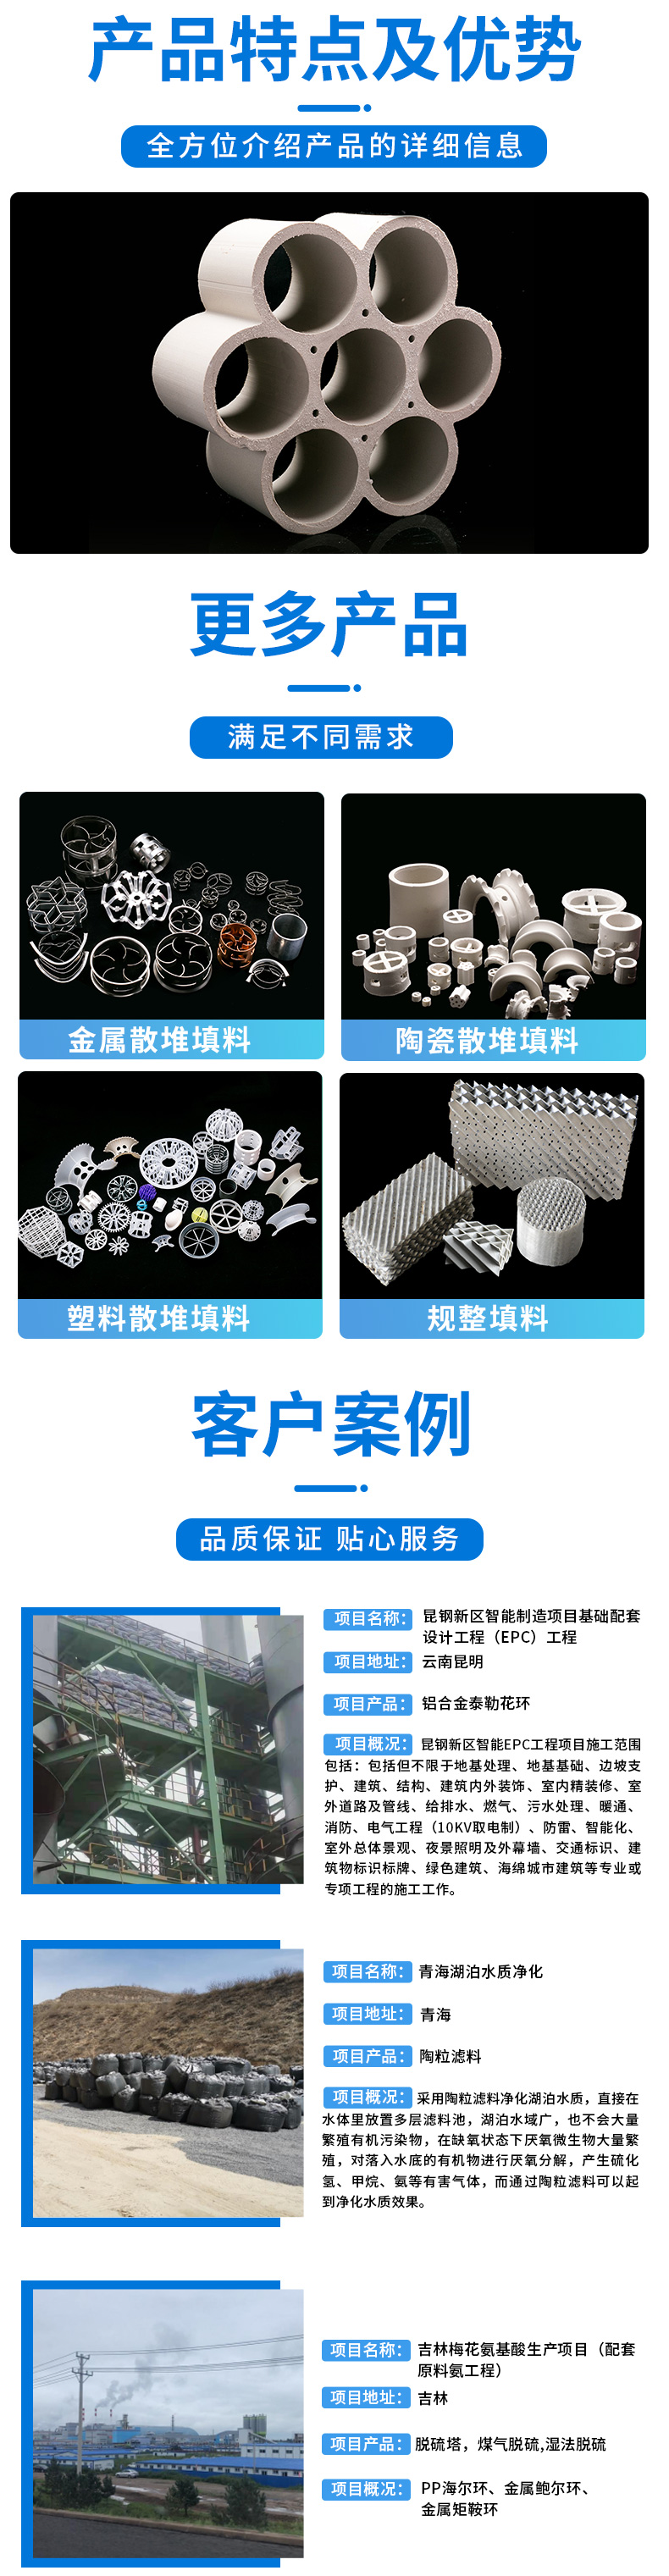 Light ceramic multi toothed ring packing ceramic composite ring for high-temperature, acid and alkali resistant desulfurization